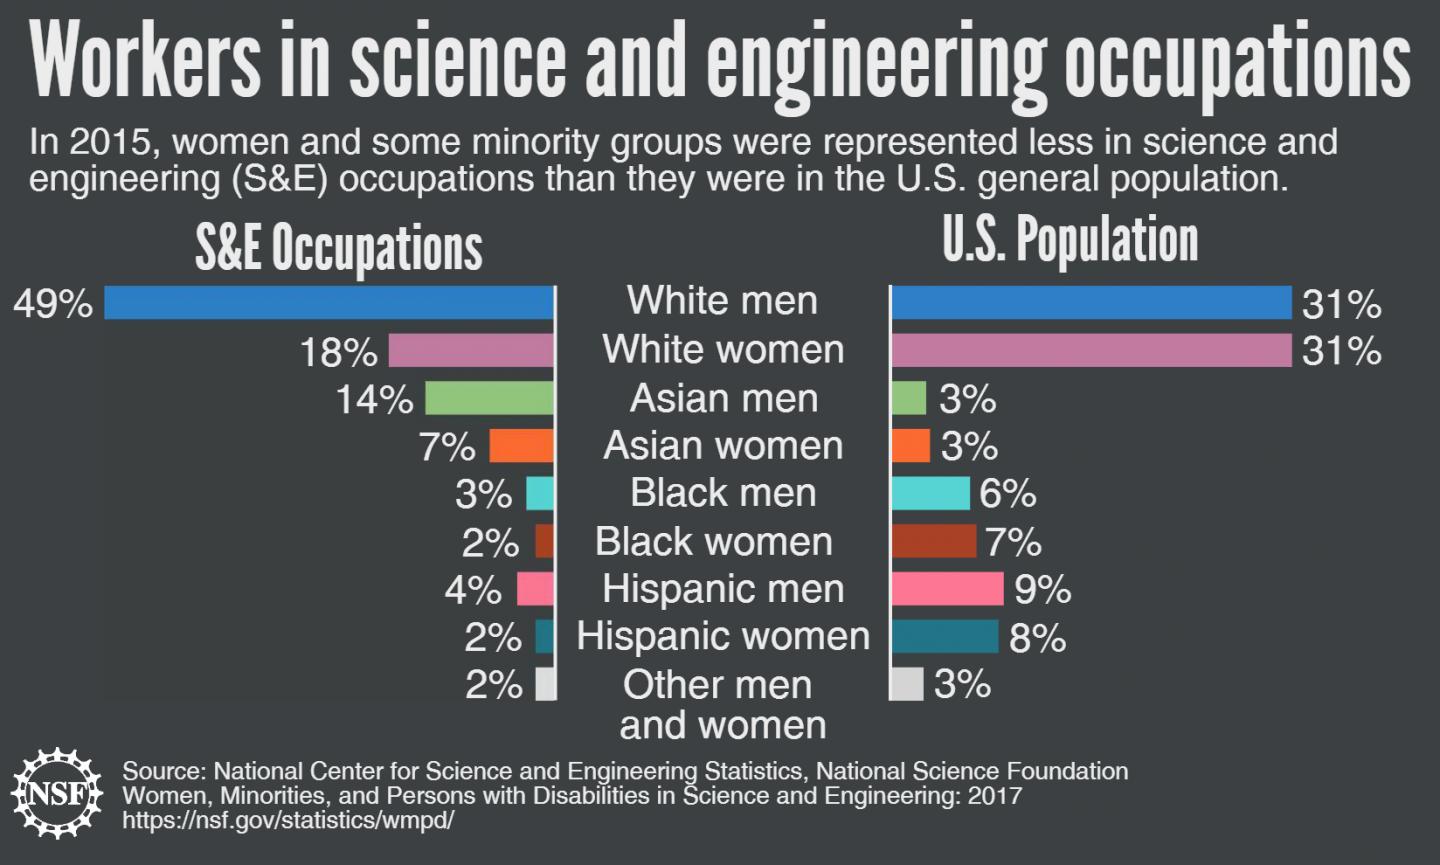 How Does the Science and Engineering Workforce Compare to the US Population?